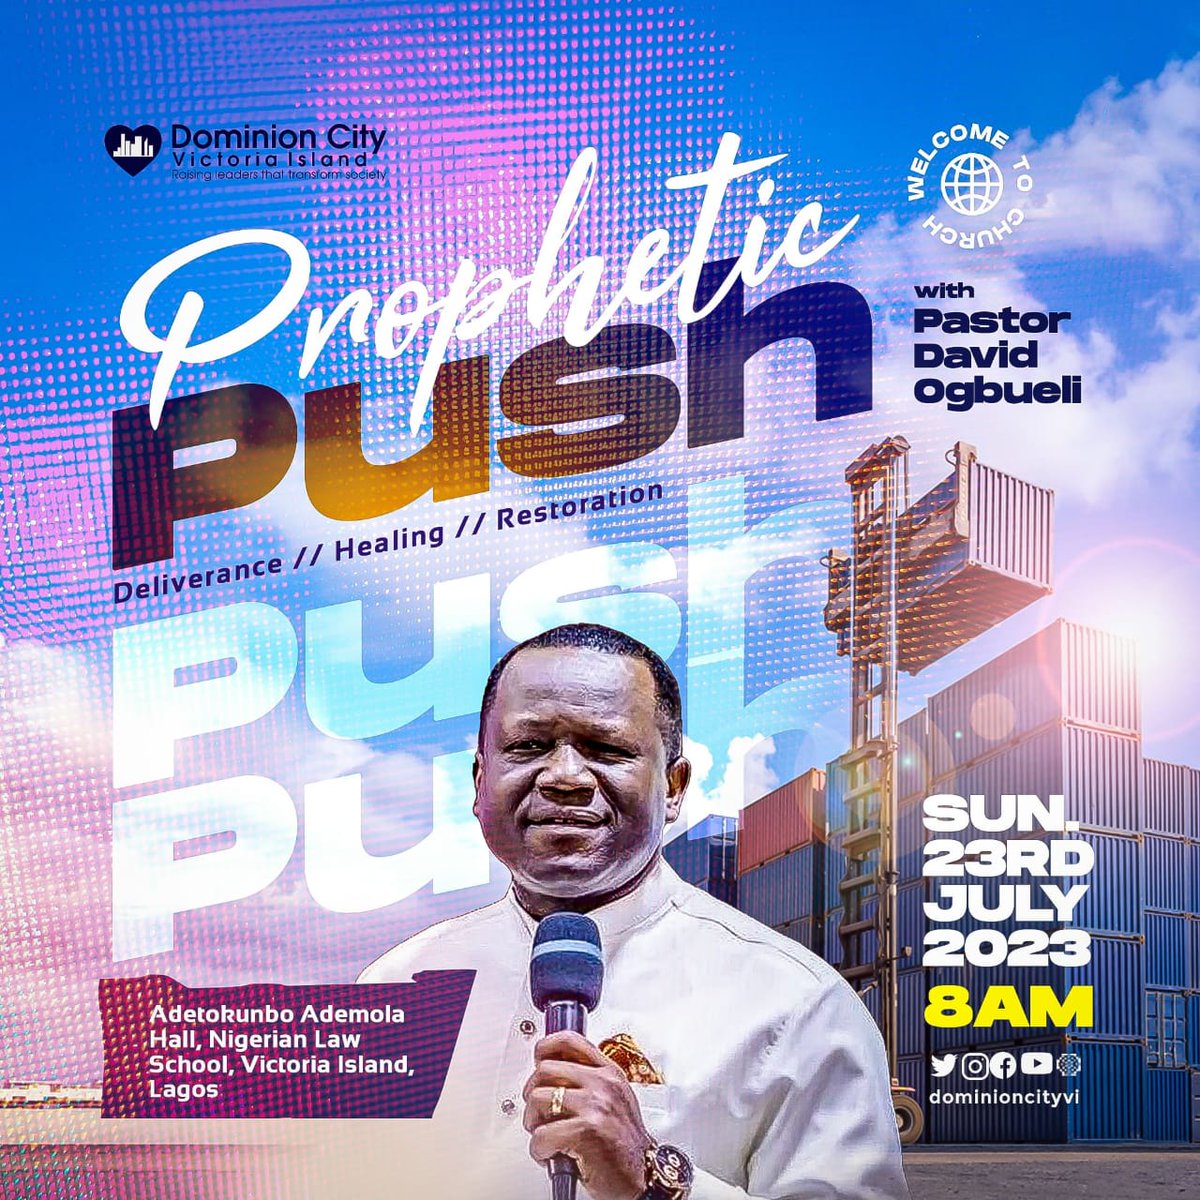 We are ready, are you? Need a seat reservation? Tell someone who's not aware, Rev David Ogbueli @pstdavidogbueli is in #DcVi 8am Sunday for a #PropheticPush. There will be Miracles, Deliverance, Healing, Revelation... His coming will usher in a new phase of good things for us